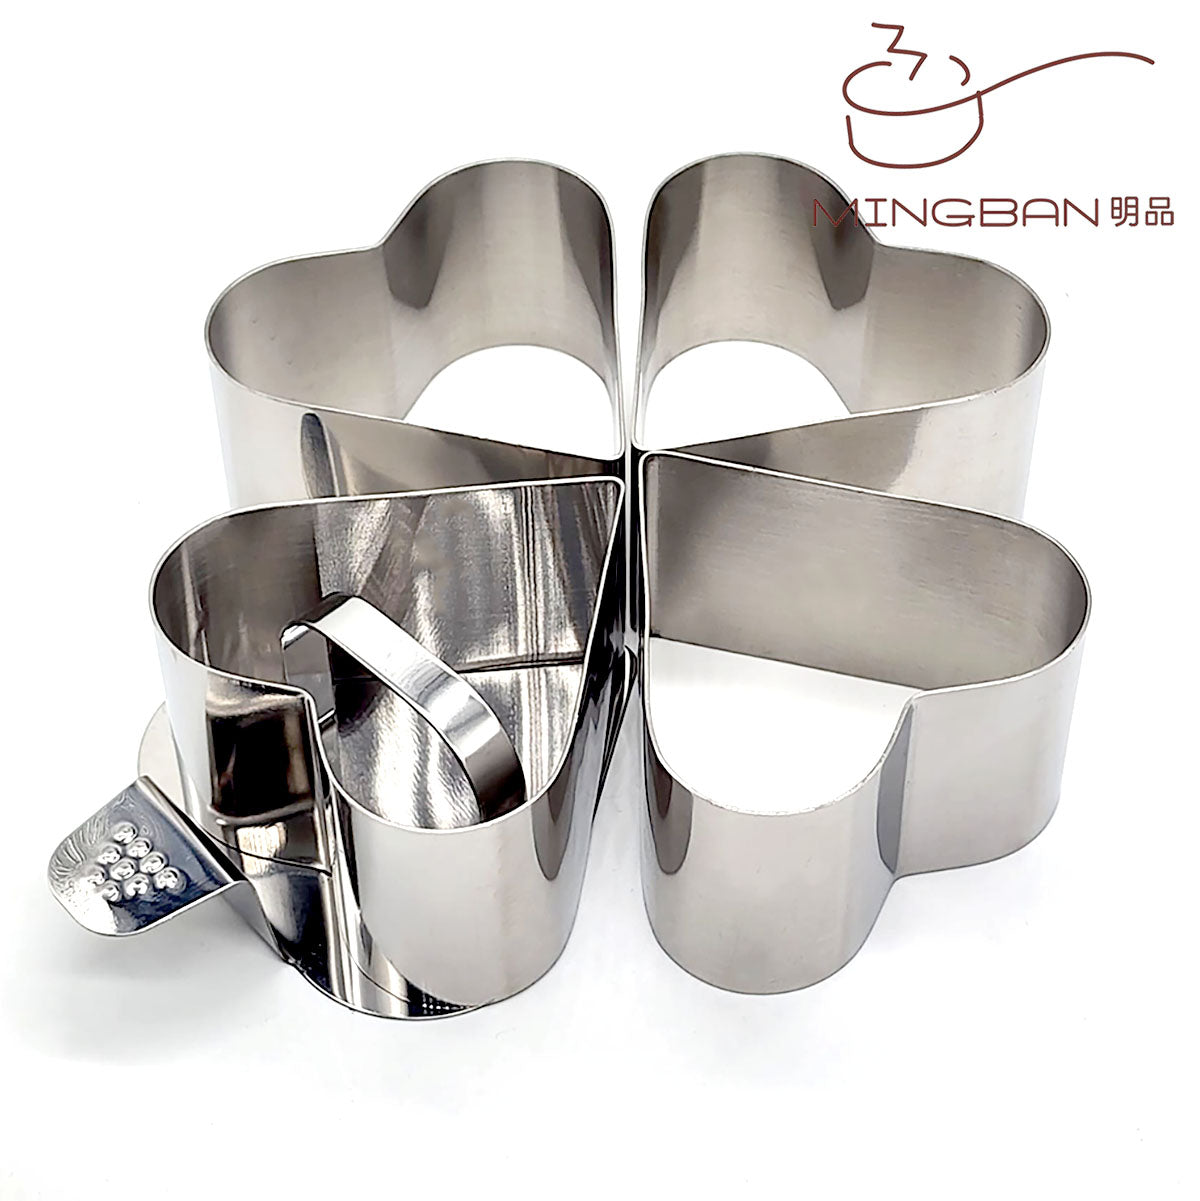 3 inch stainless steel heart-shaped mousse cake ring with pusher+ removable bottom plate (set of 4)